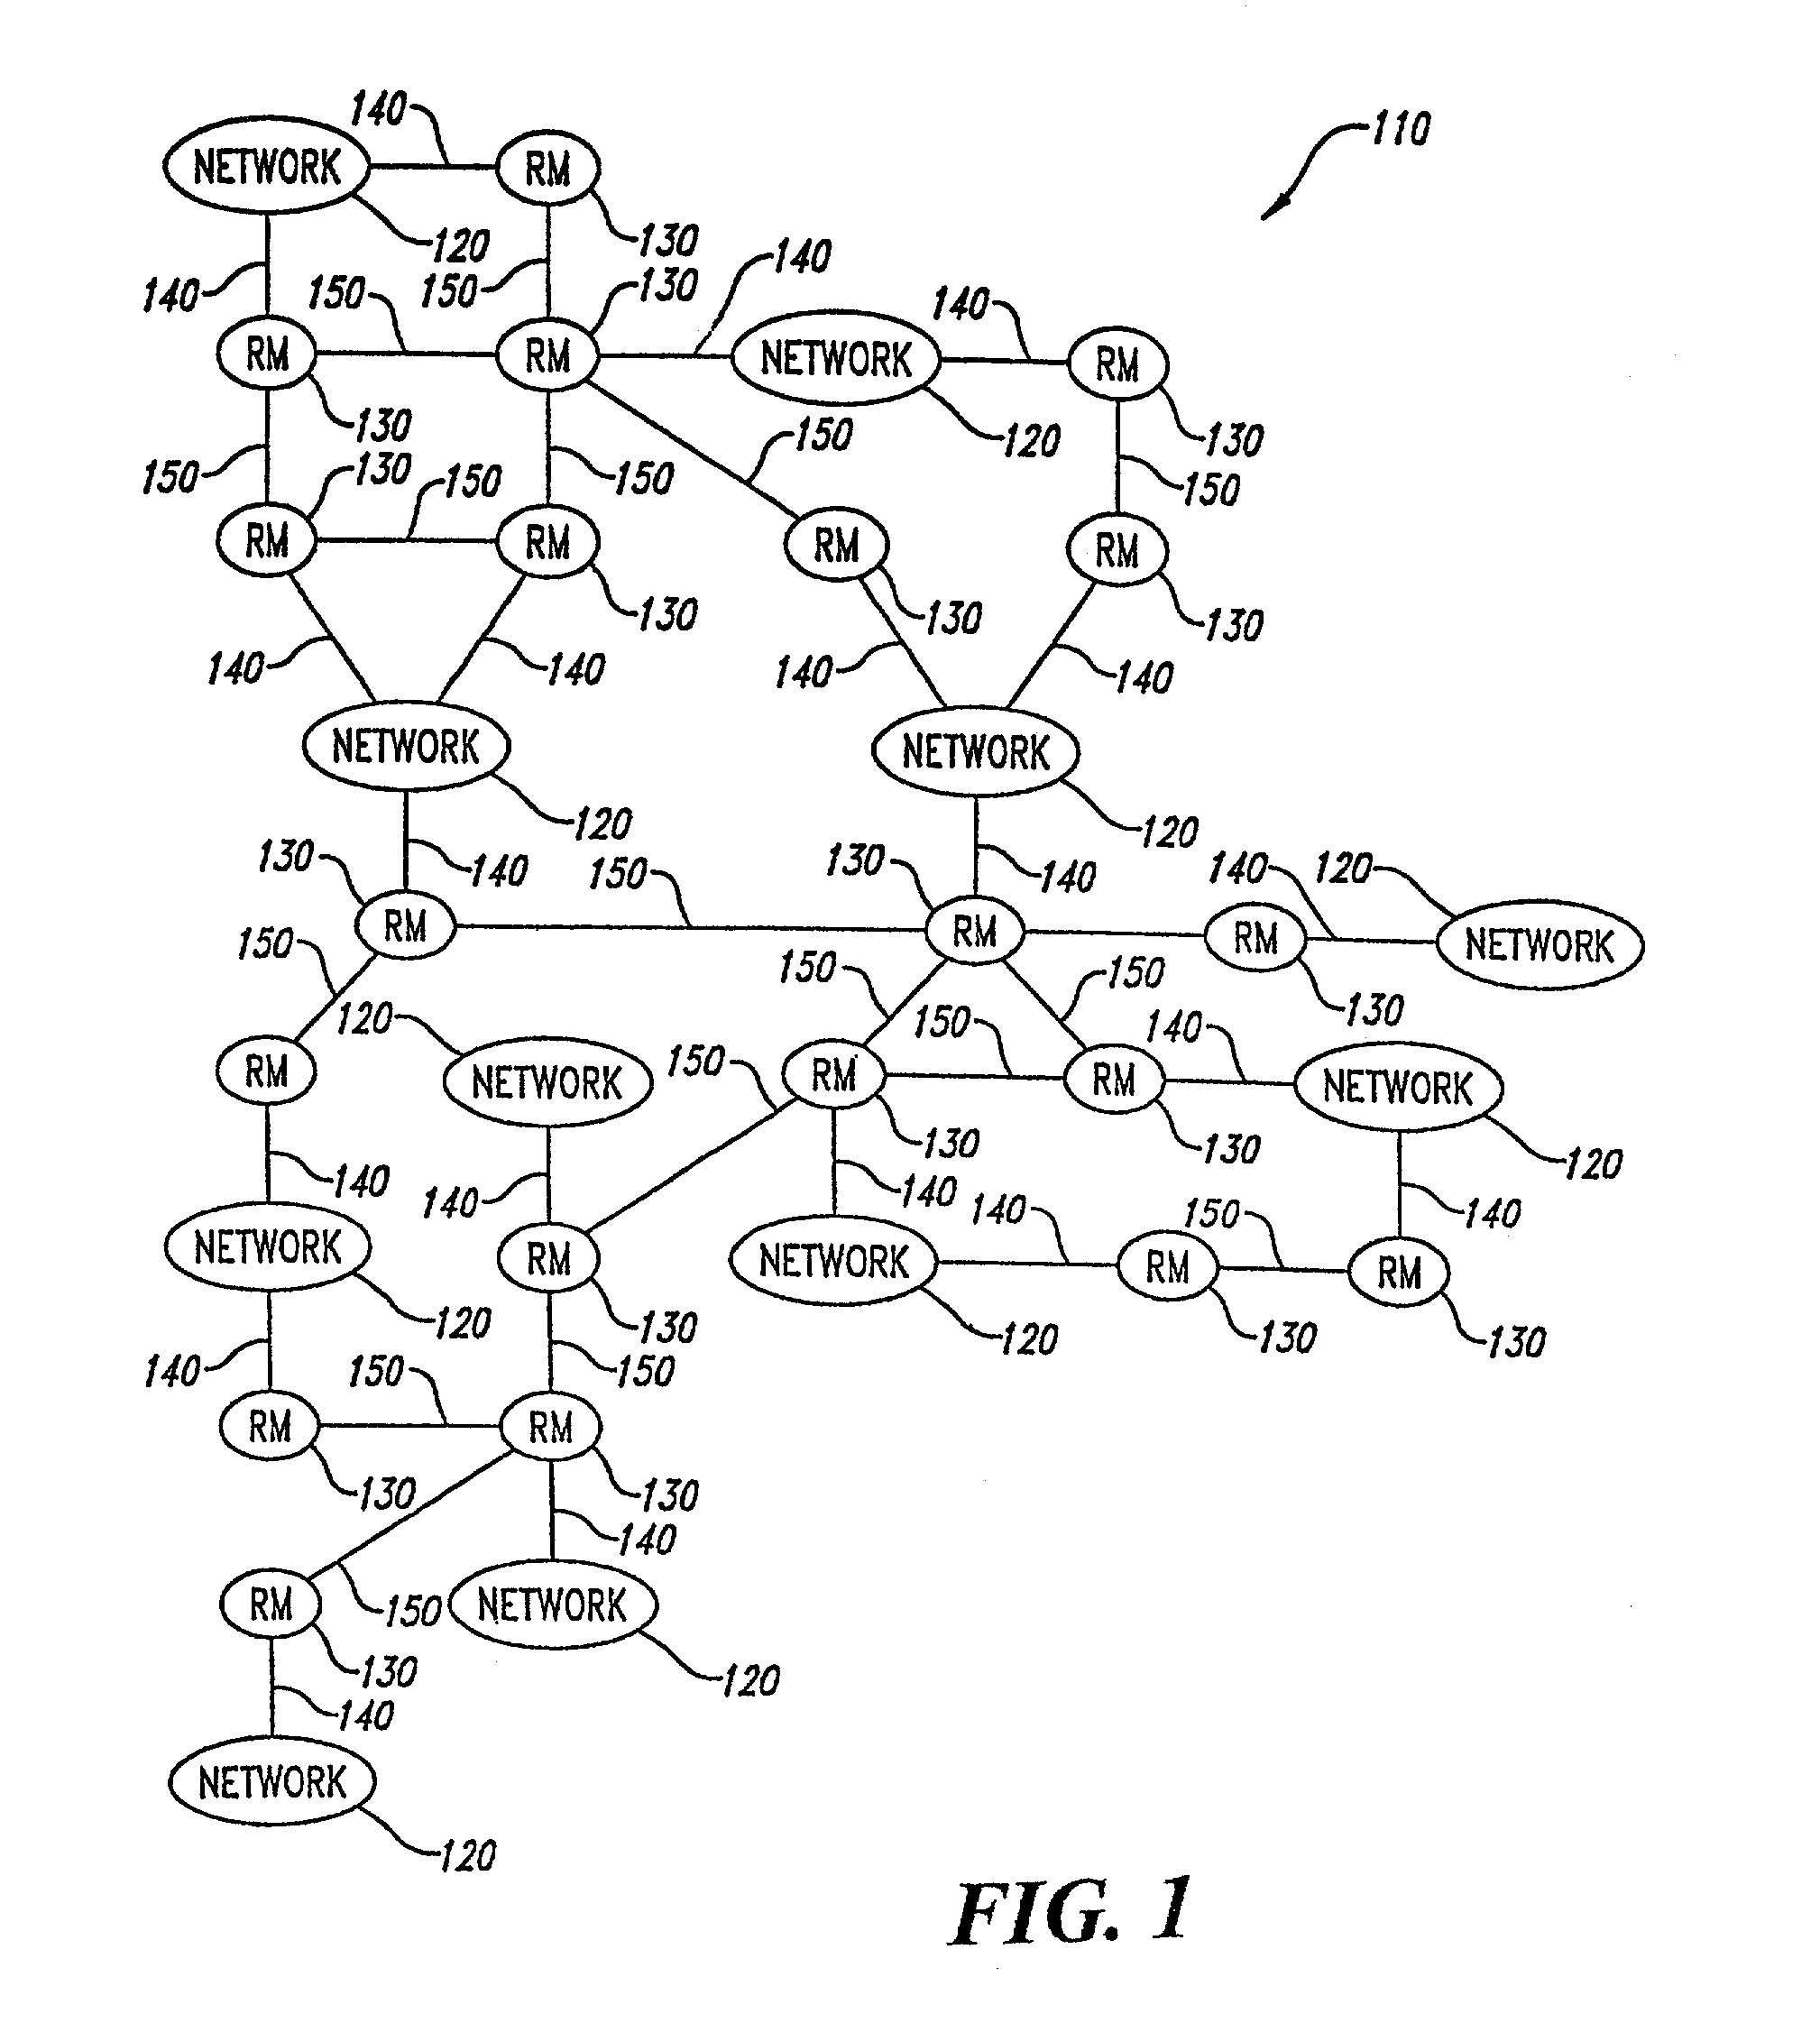 Network traffic director system having modules that implement merit or penalty functions involving stochastic changes in network topology